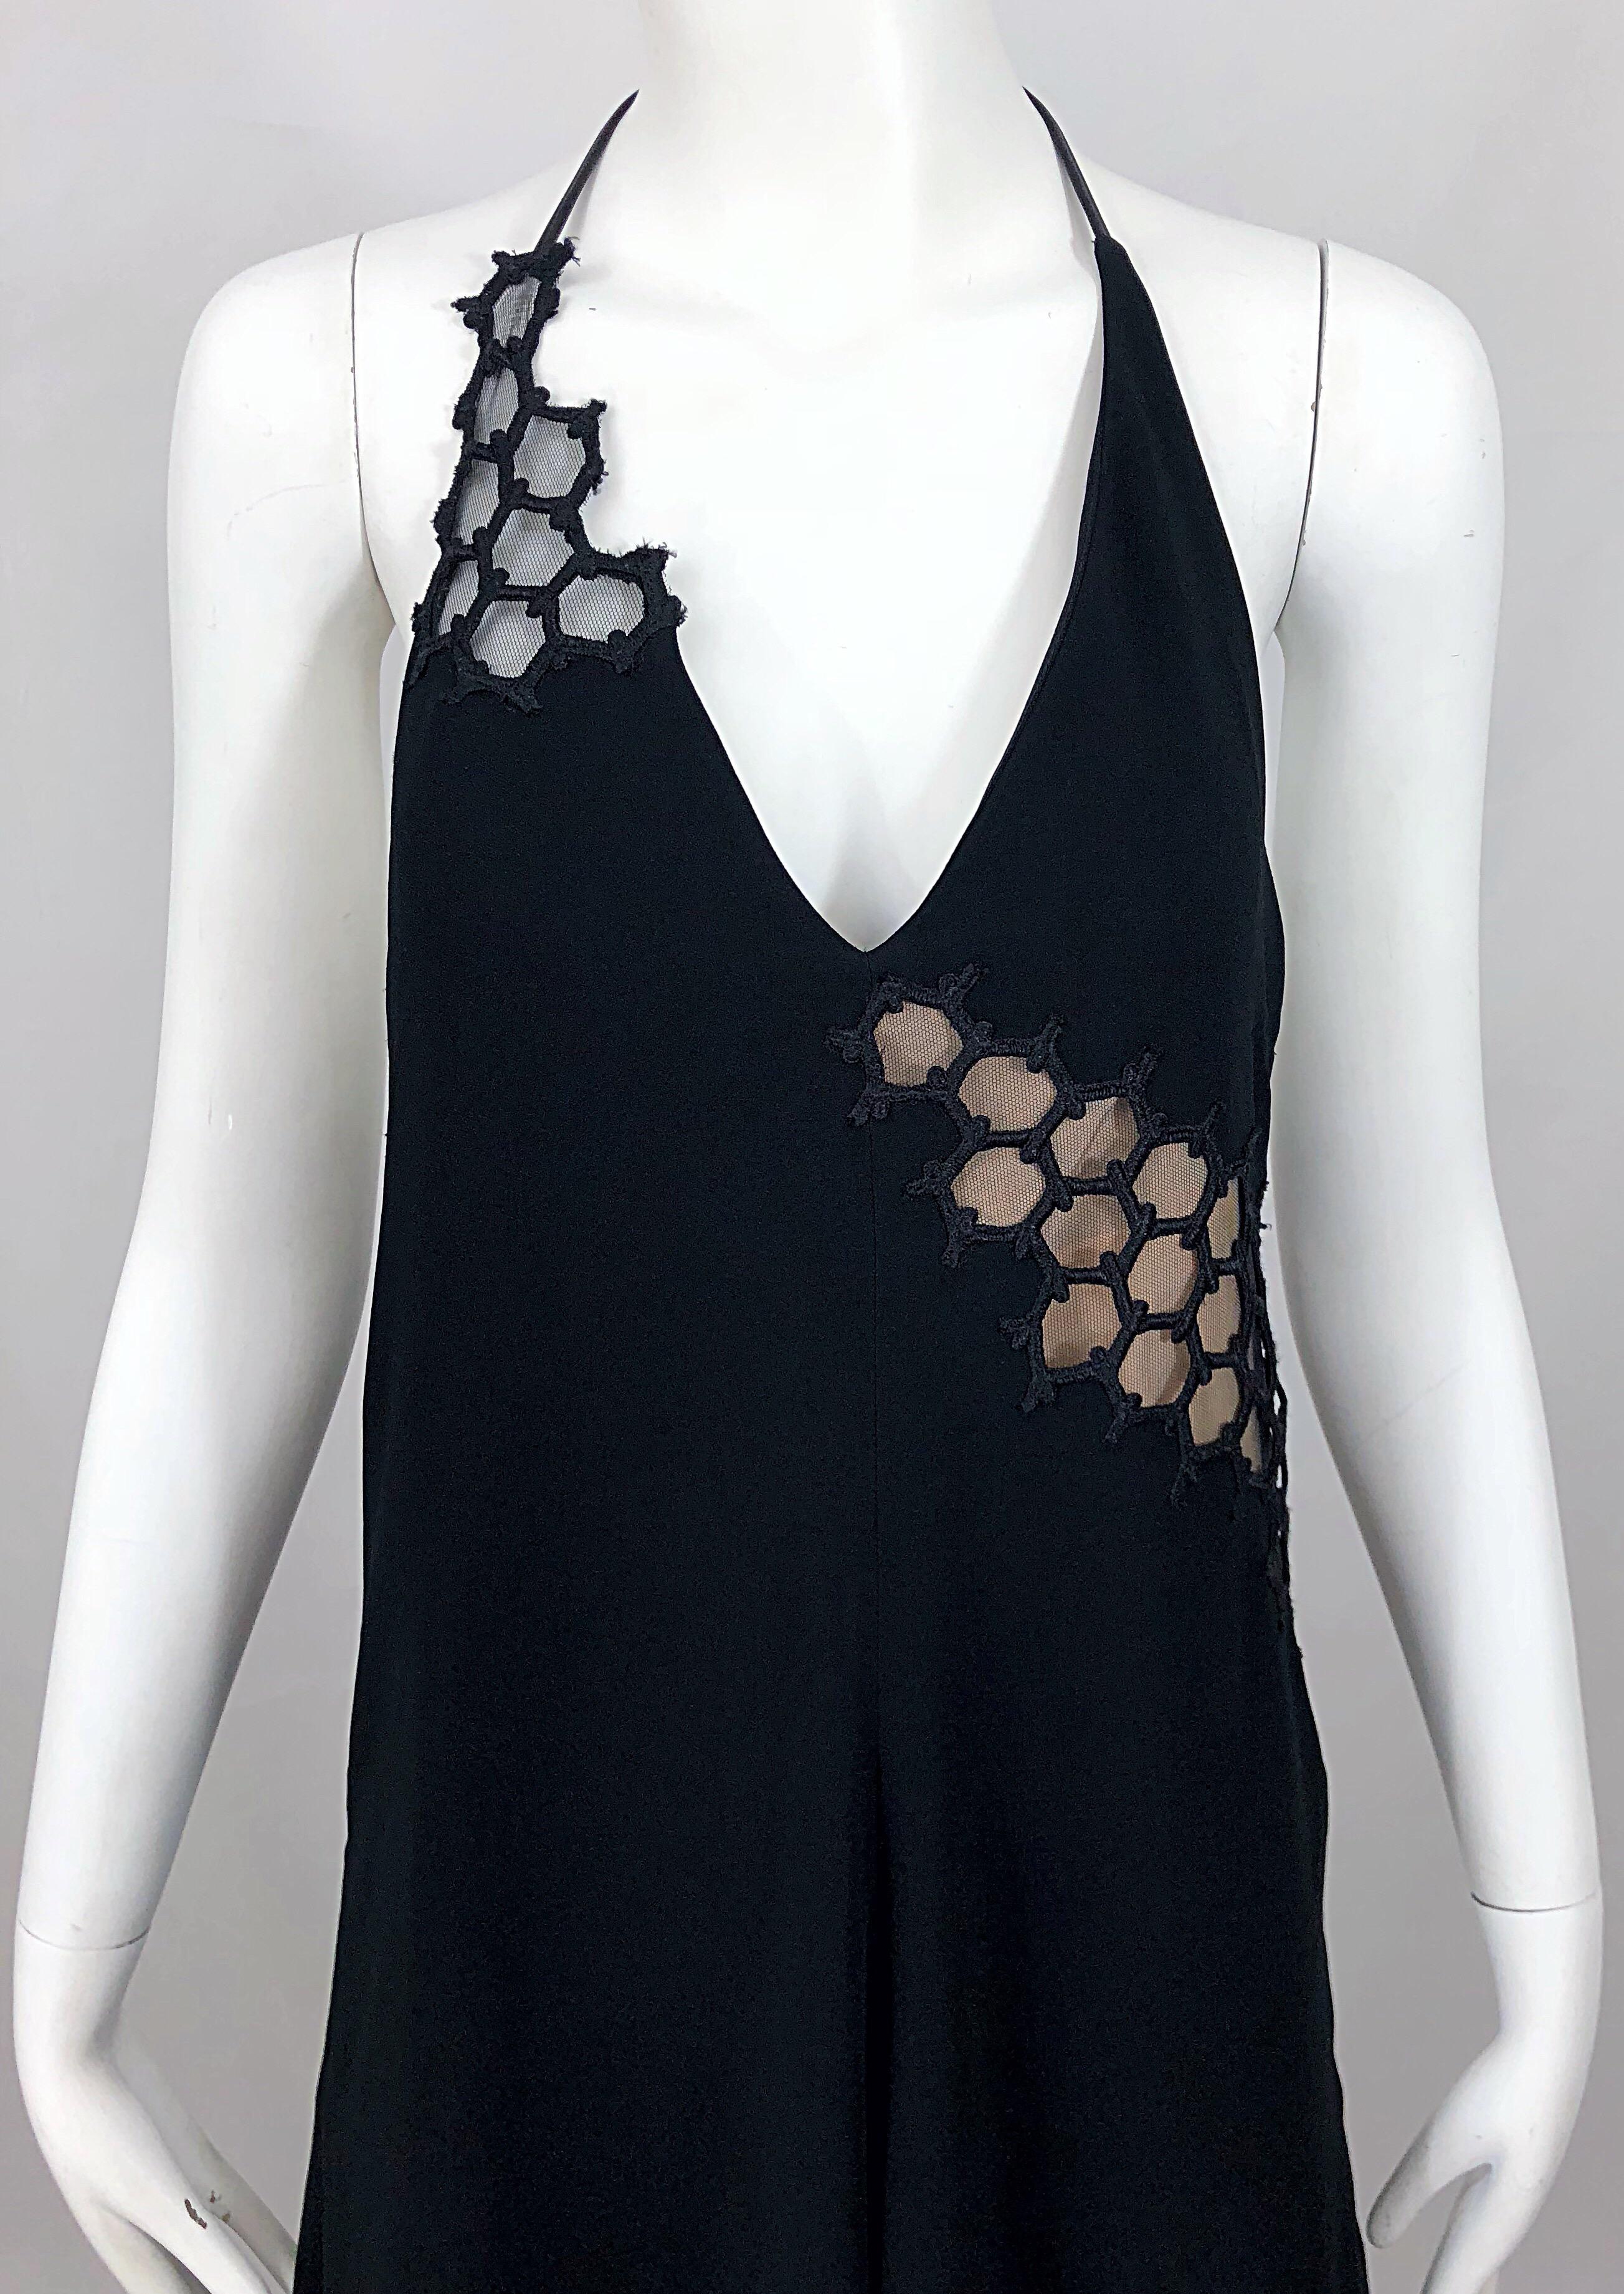 Reed Krakoff Spring 2015 Runway Size 2 / 4 Black Nude Cut Out Halter Dress In Excellent Condition For Sale In San Diego, CA